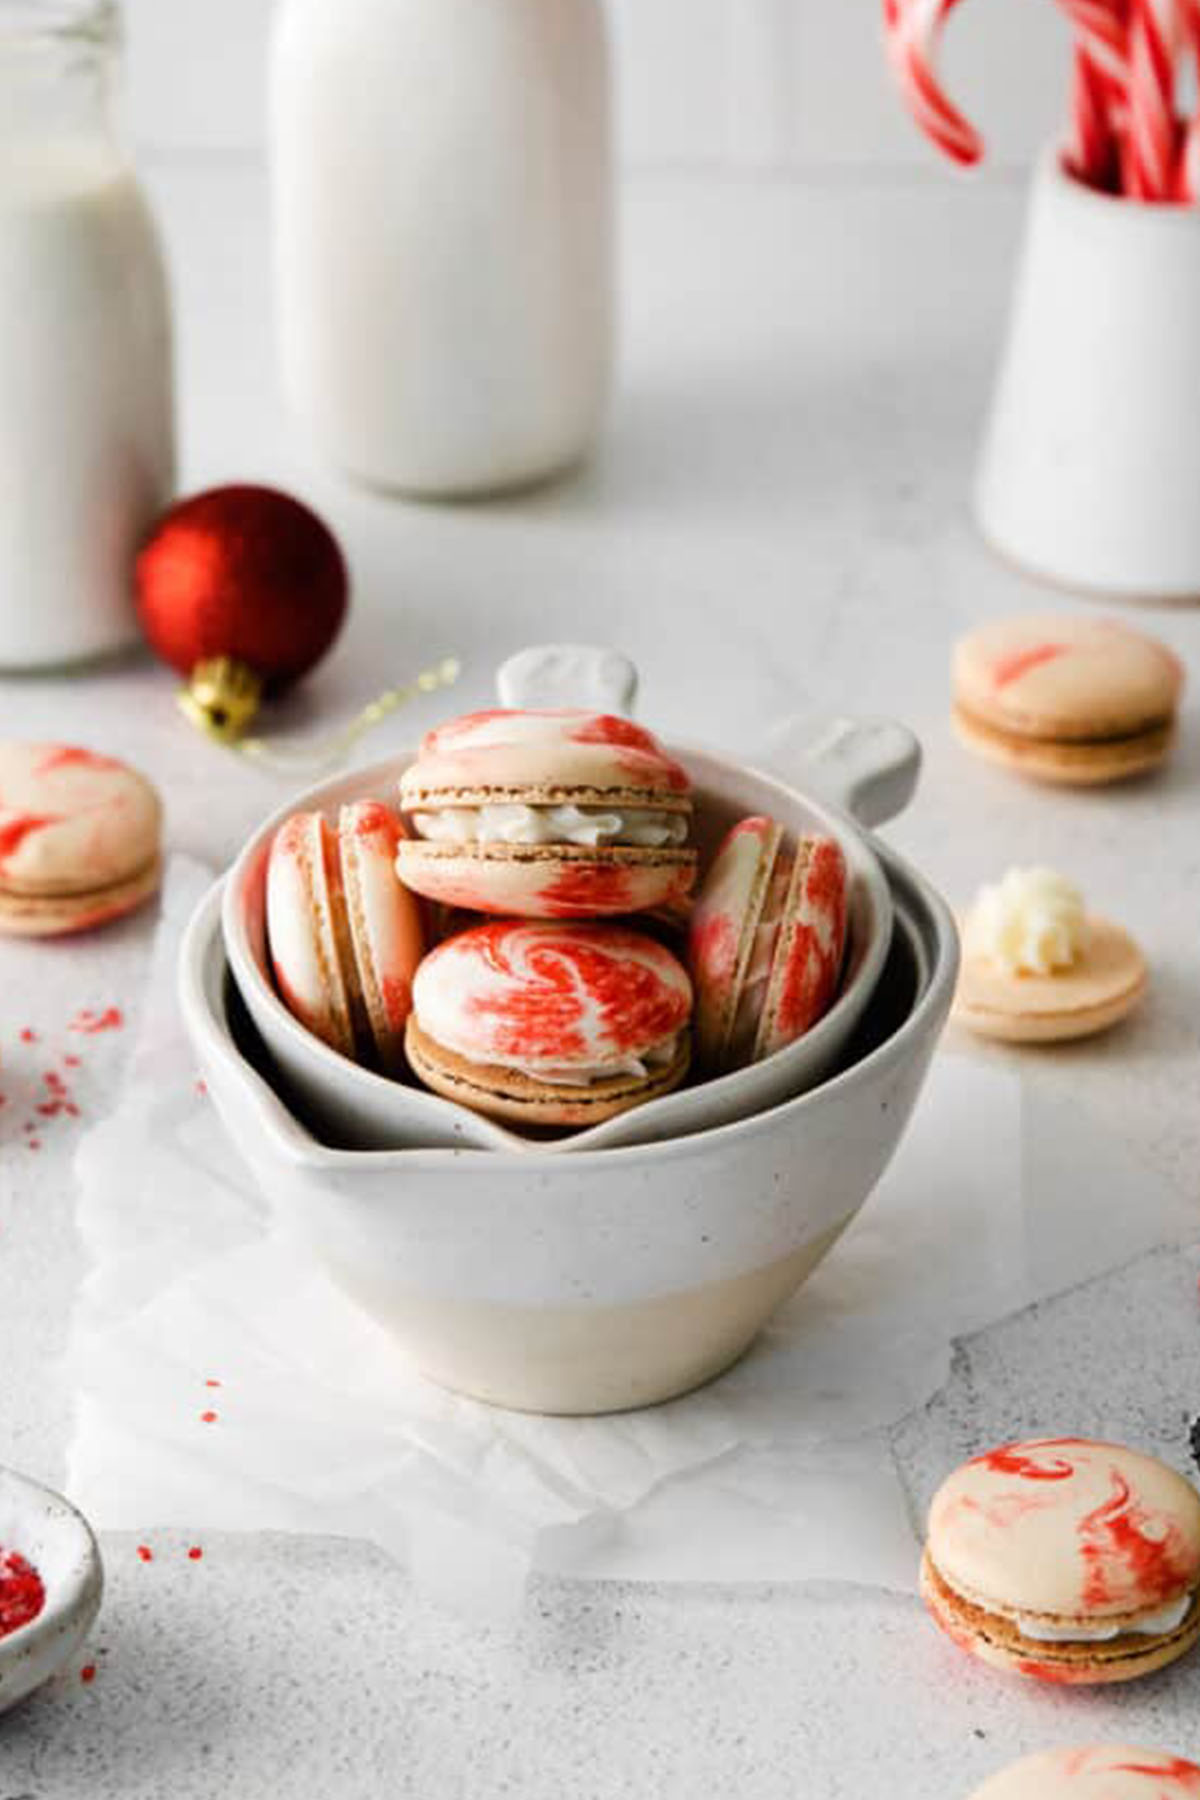 peppermint macarons with red and white swirled macaron shells.